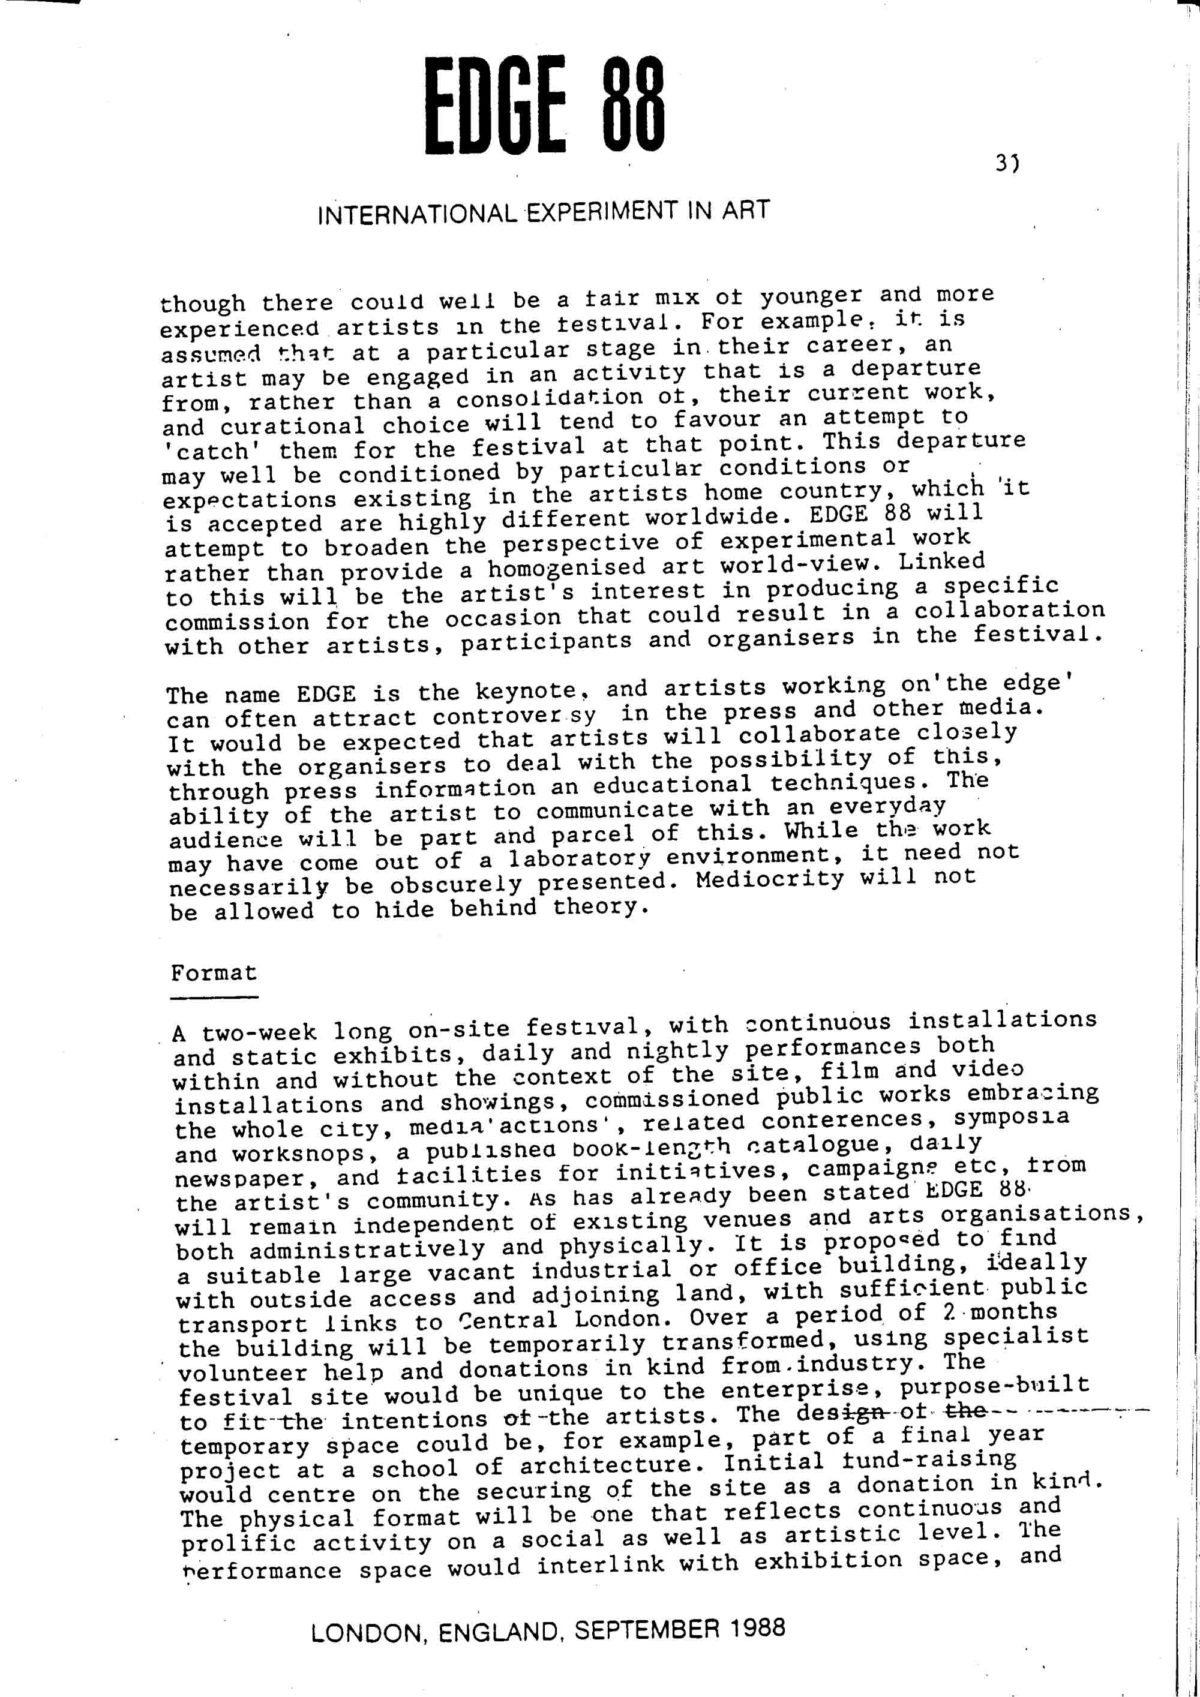 Rationale, 1988 (Page 3 of 5)